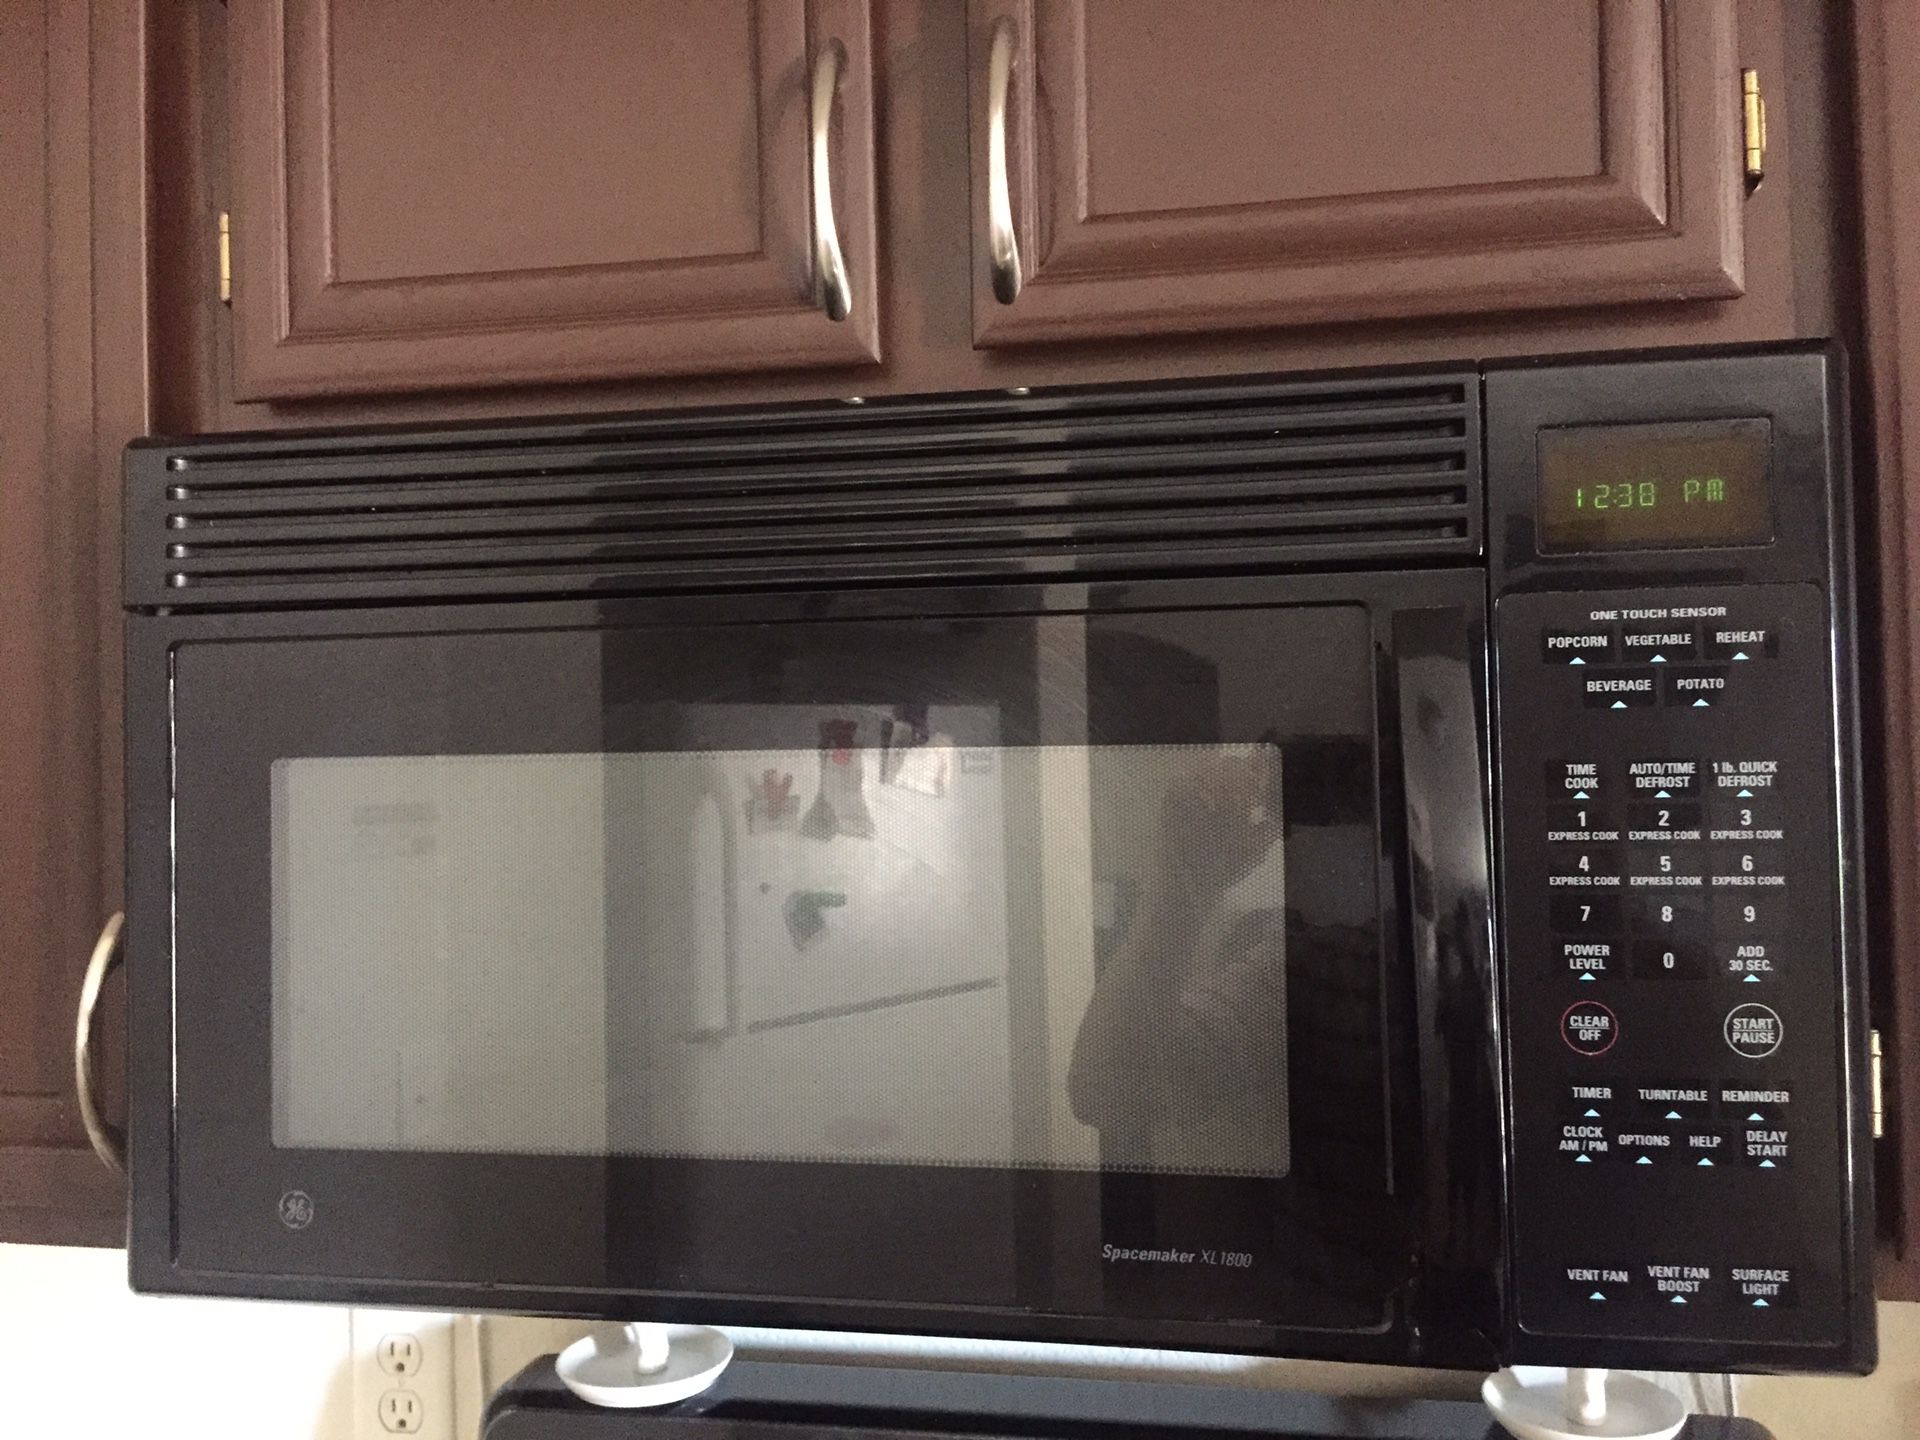 Black GE Over The Oven Microwave